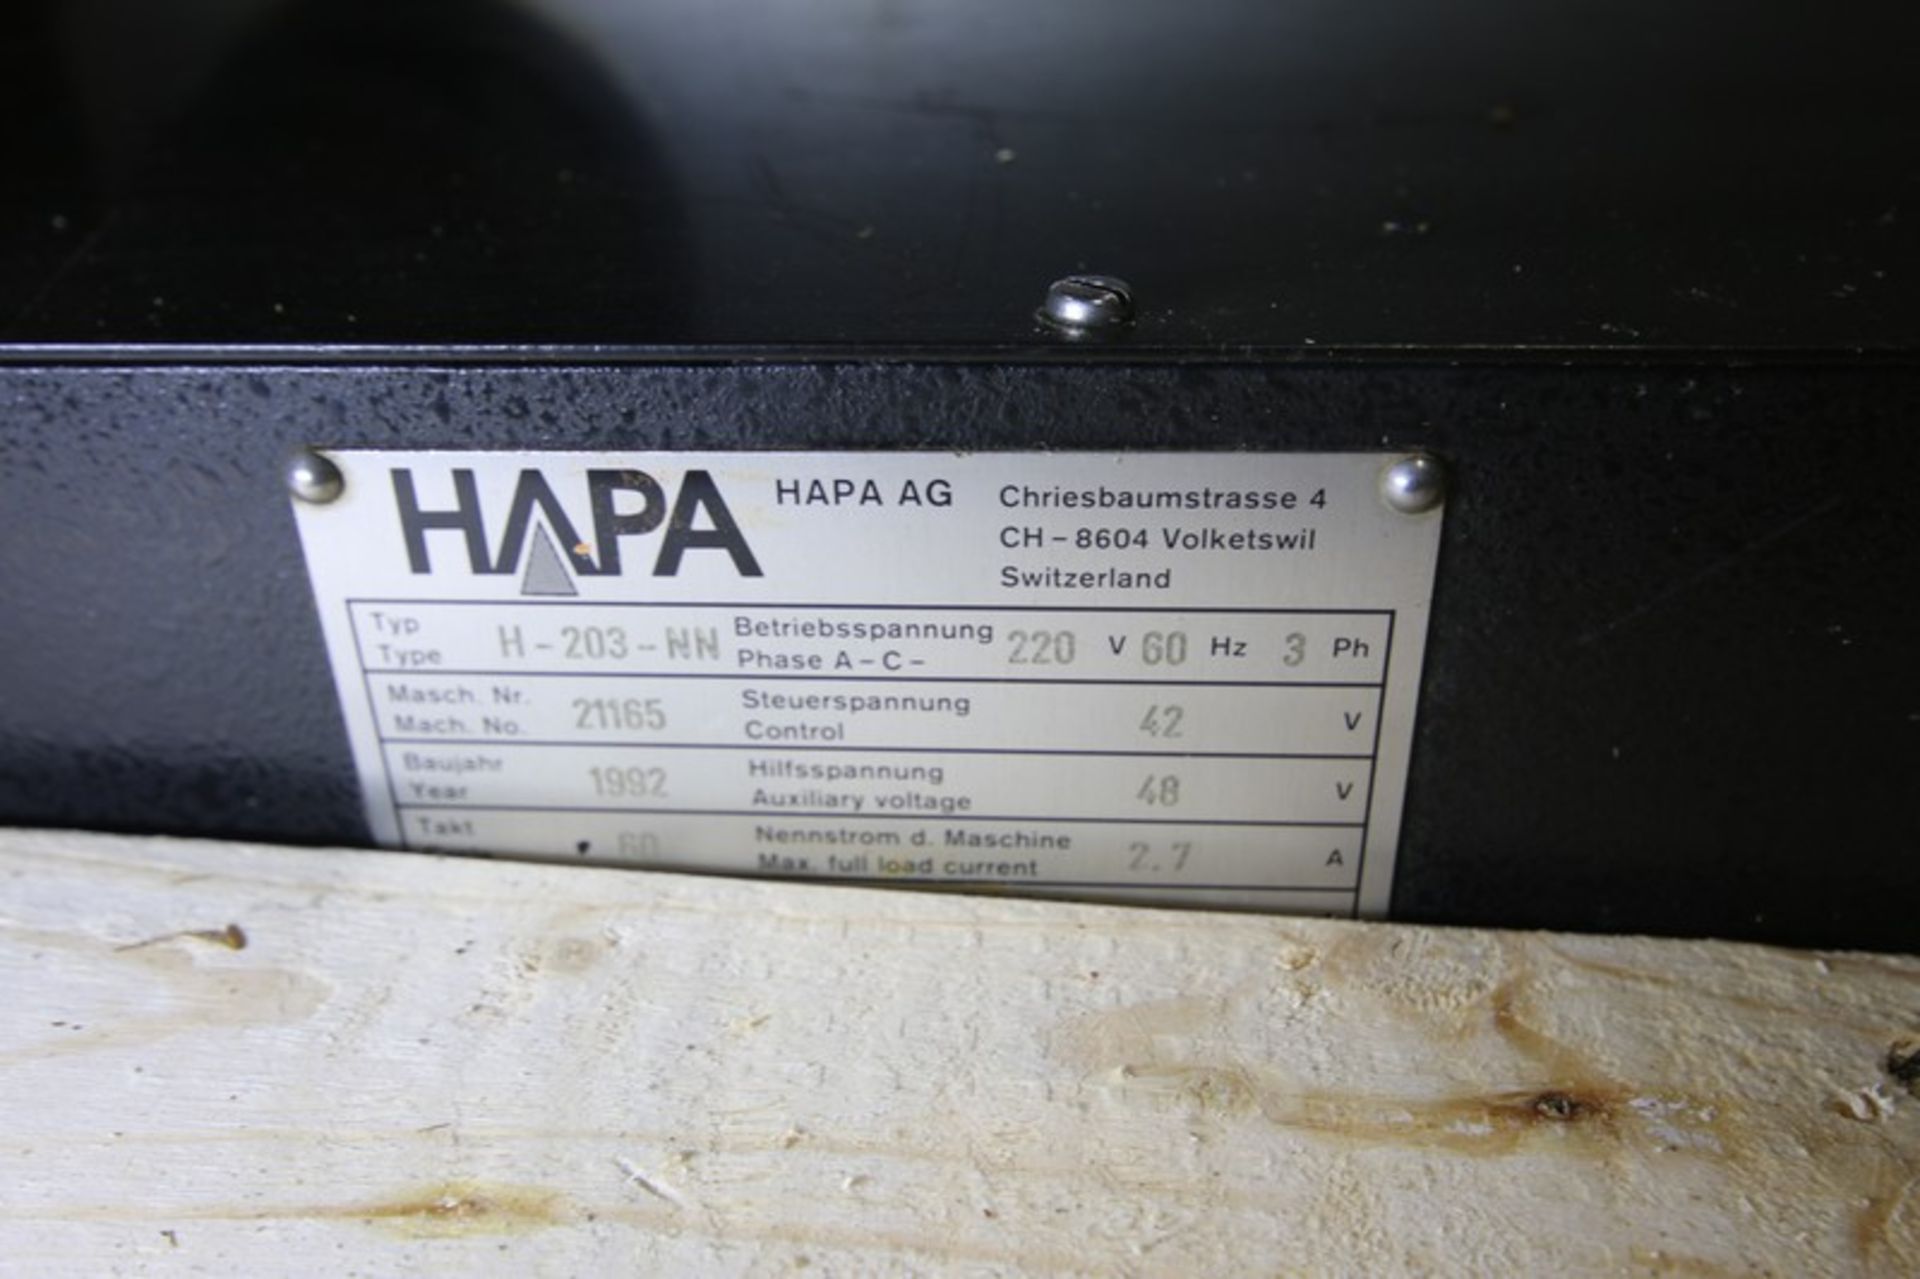 Hapmatic Printer, Type H-203-NN, SN 21165, 220V, (For Blister Packaging) (INV#101606) (Located @ the - Image 5 of 5